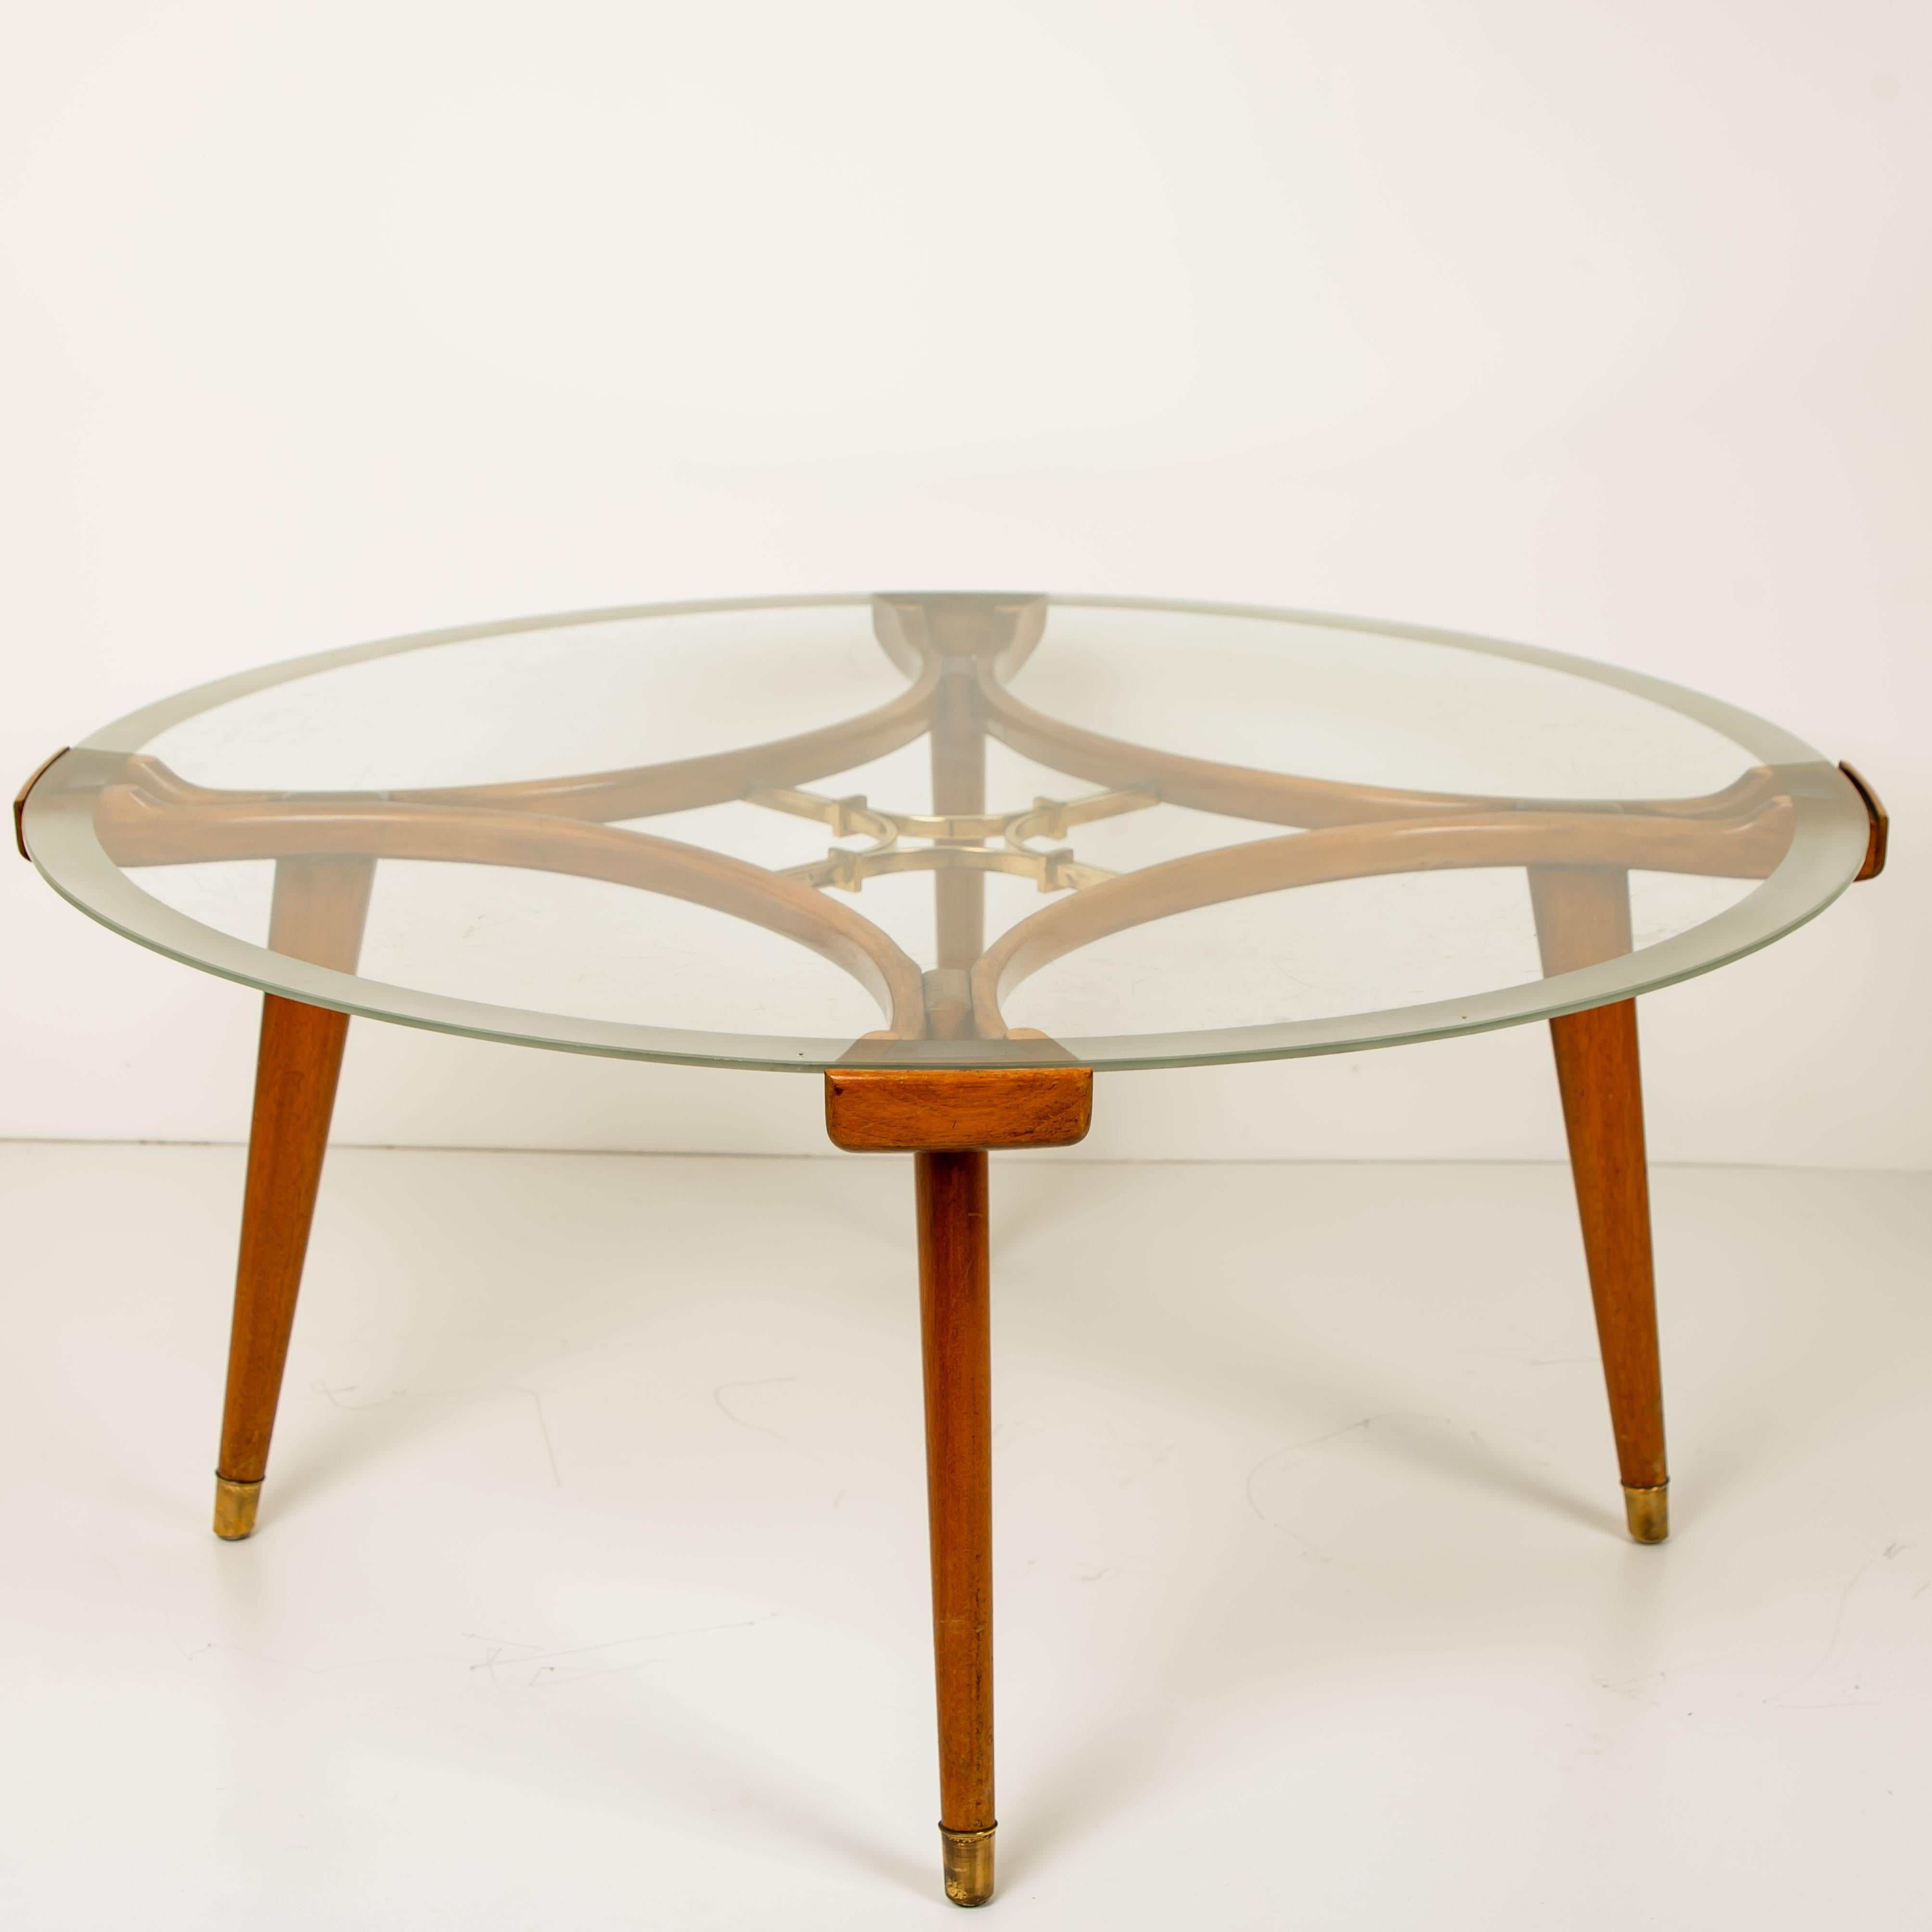 Solid Brass Walnut Glass Table, by William Watting, Produced by Fristho, 1950s For Sale 6